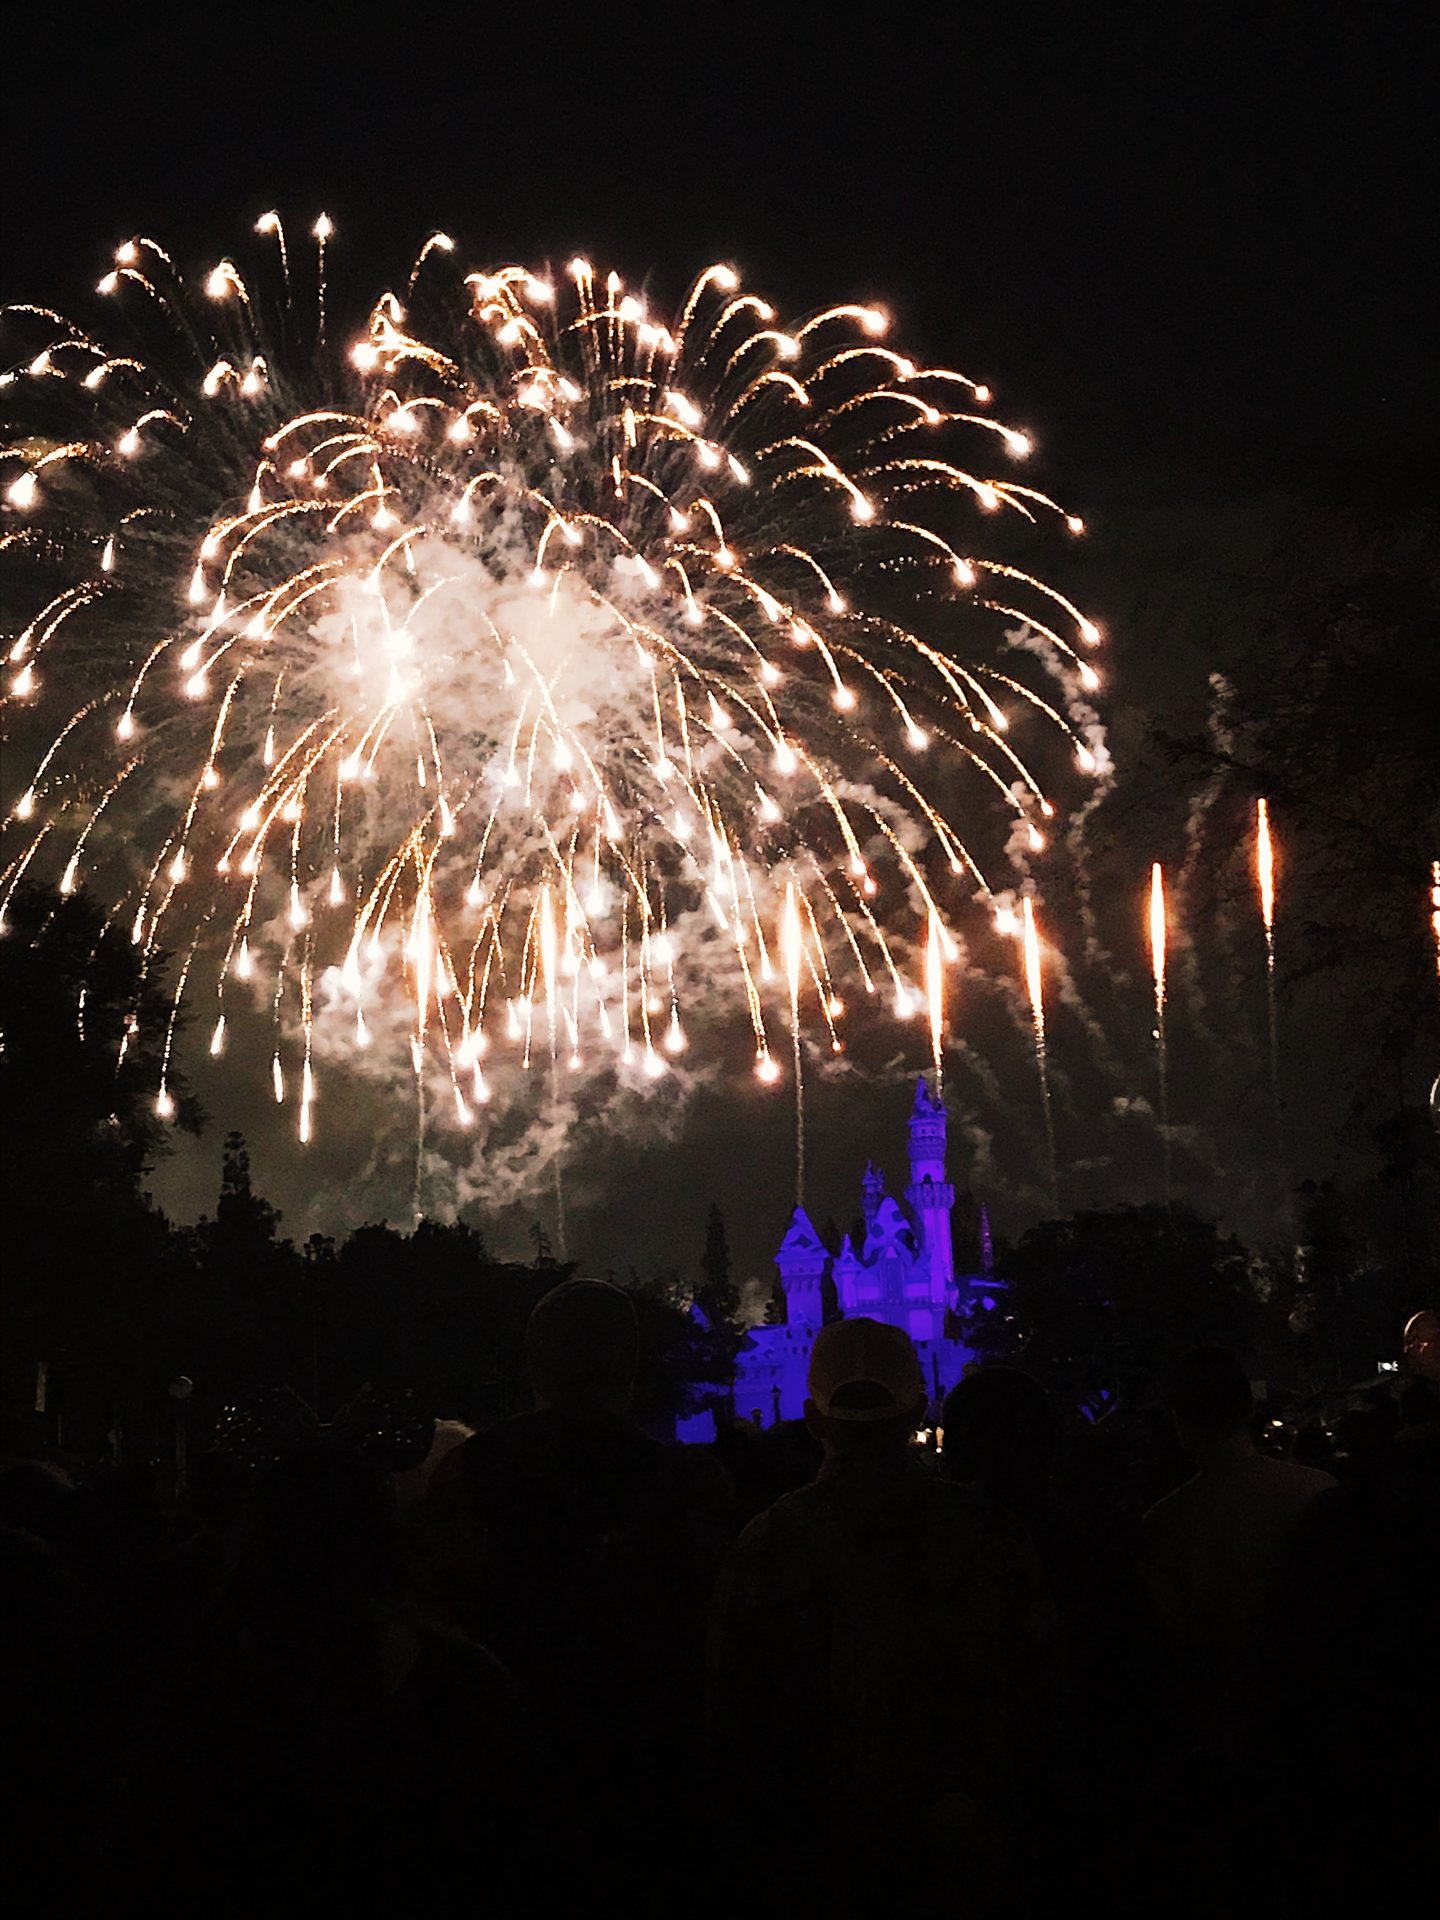 Watching the fireworks at Cinderella's castle at Disneyland in Los Angeles 